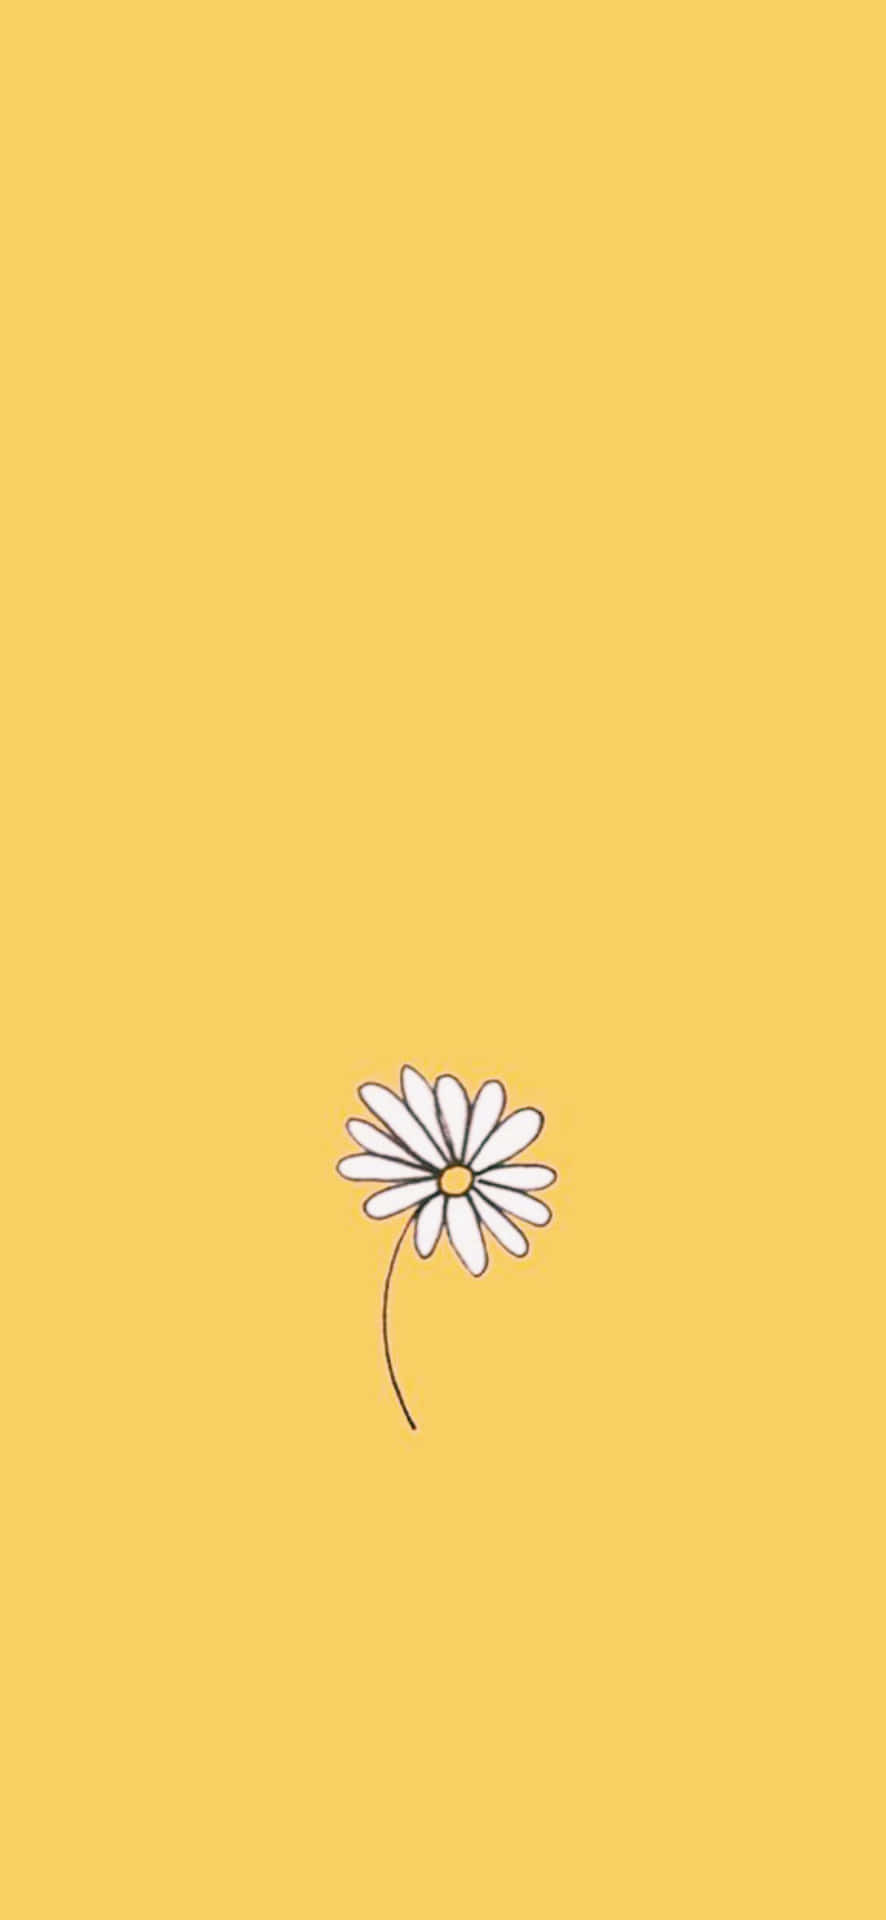 [100+] Aesthetic Yellow Wallpapers | Wallpapers.com